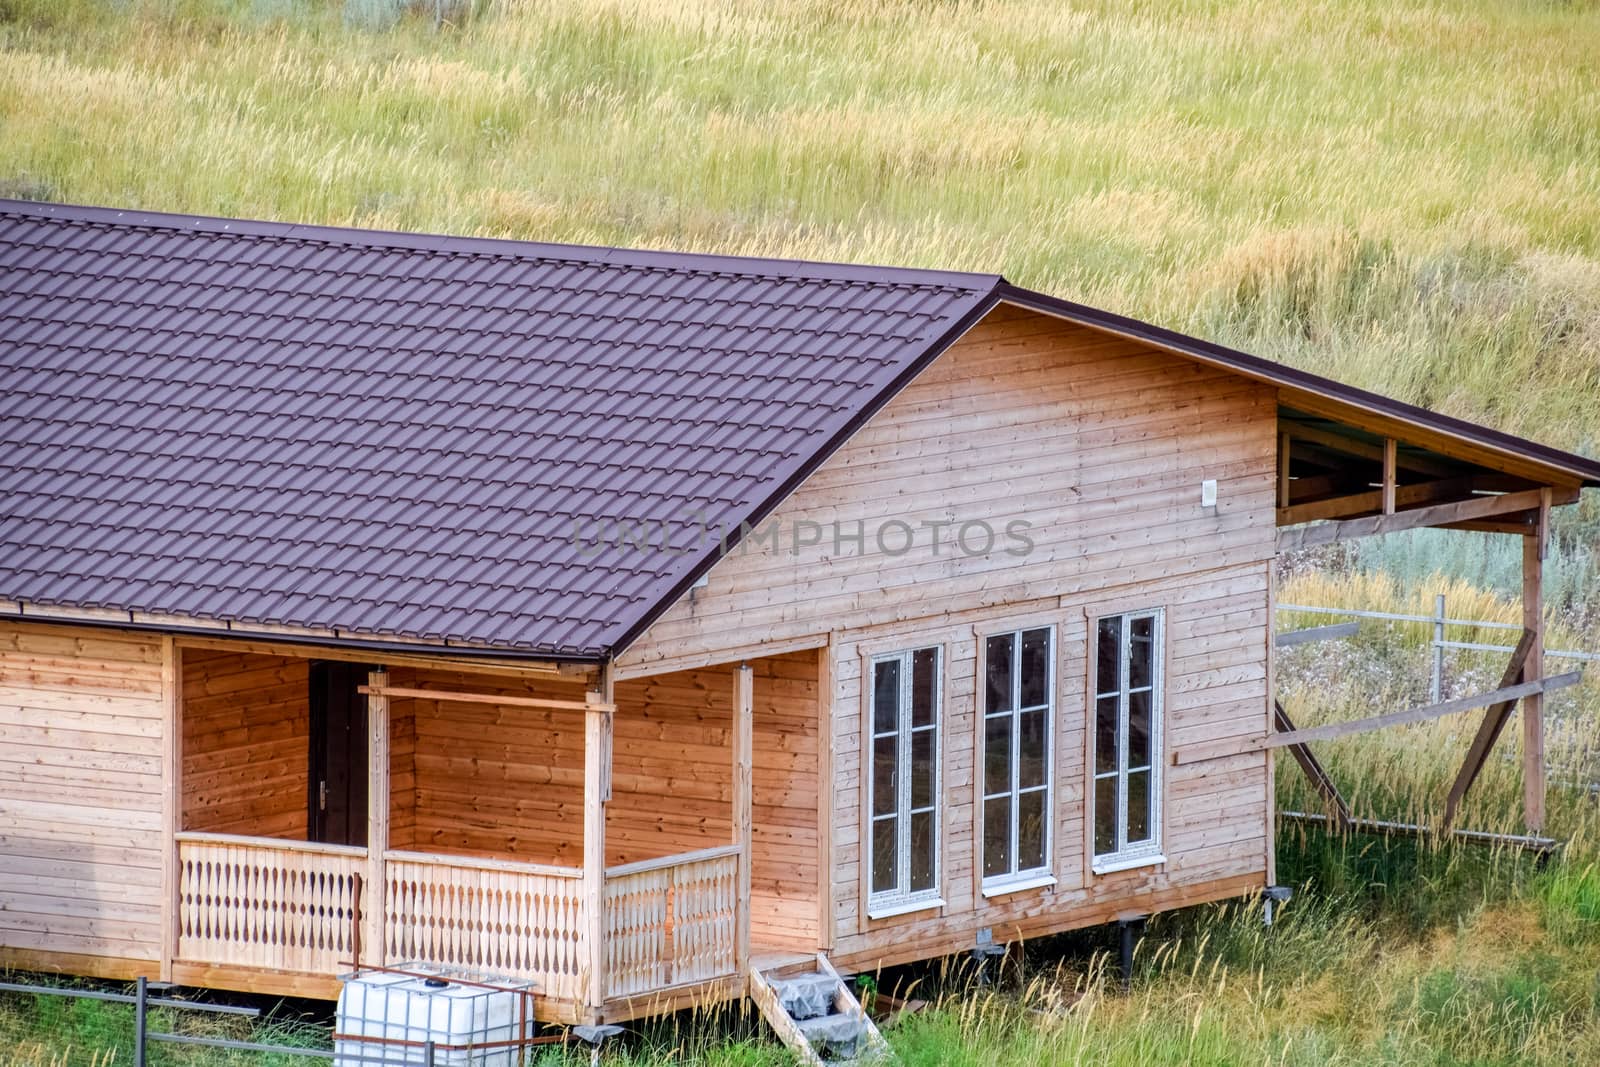 A wooden house made of timber and planks with a roof made of metal. House among the steppe.